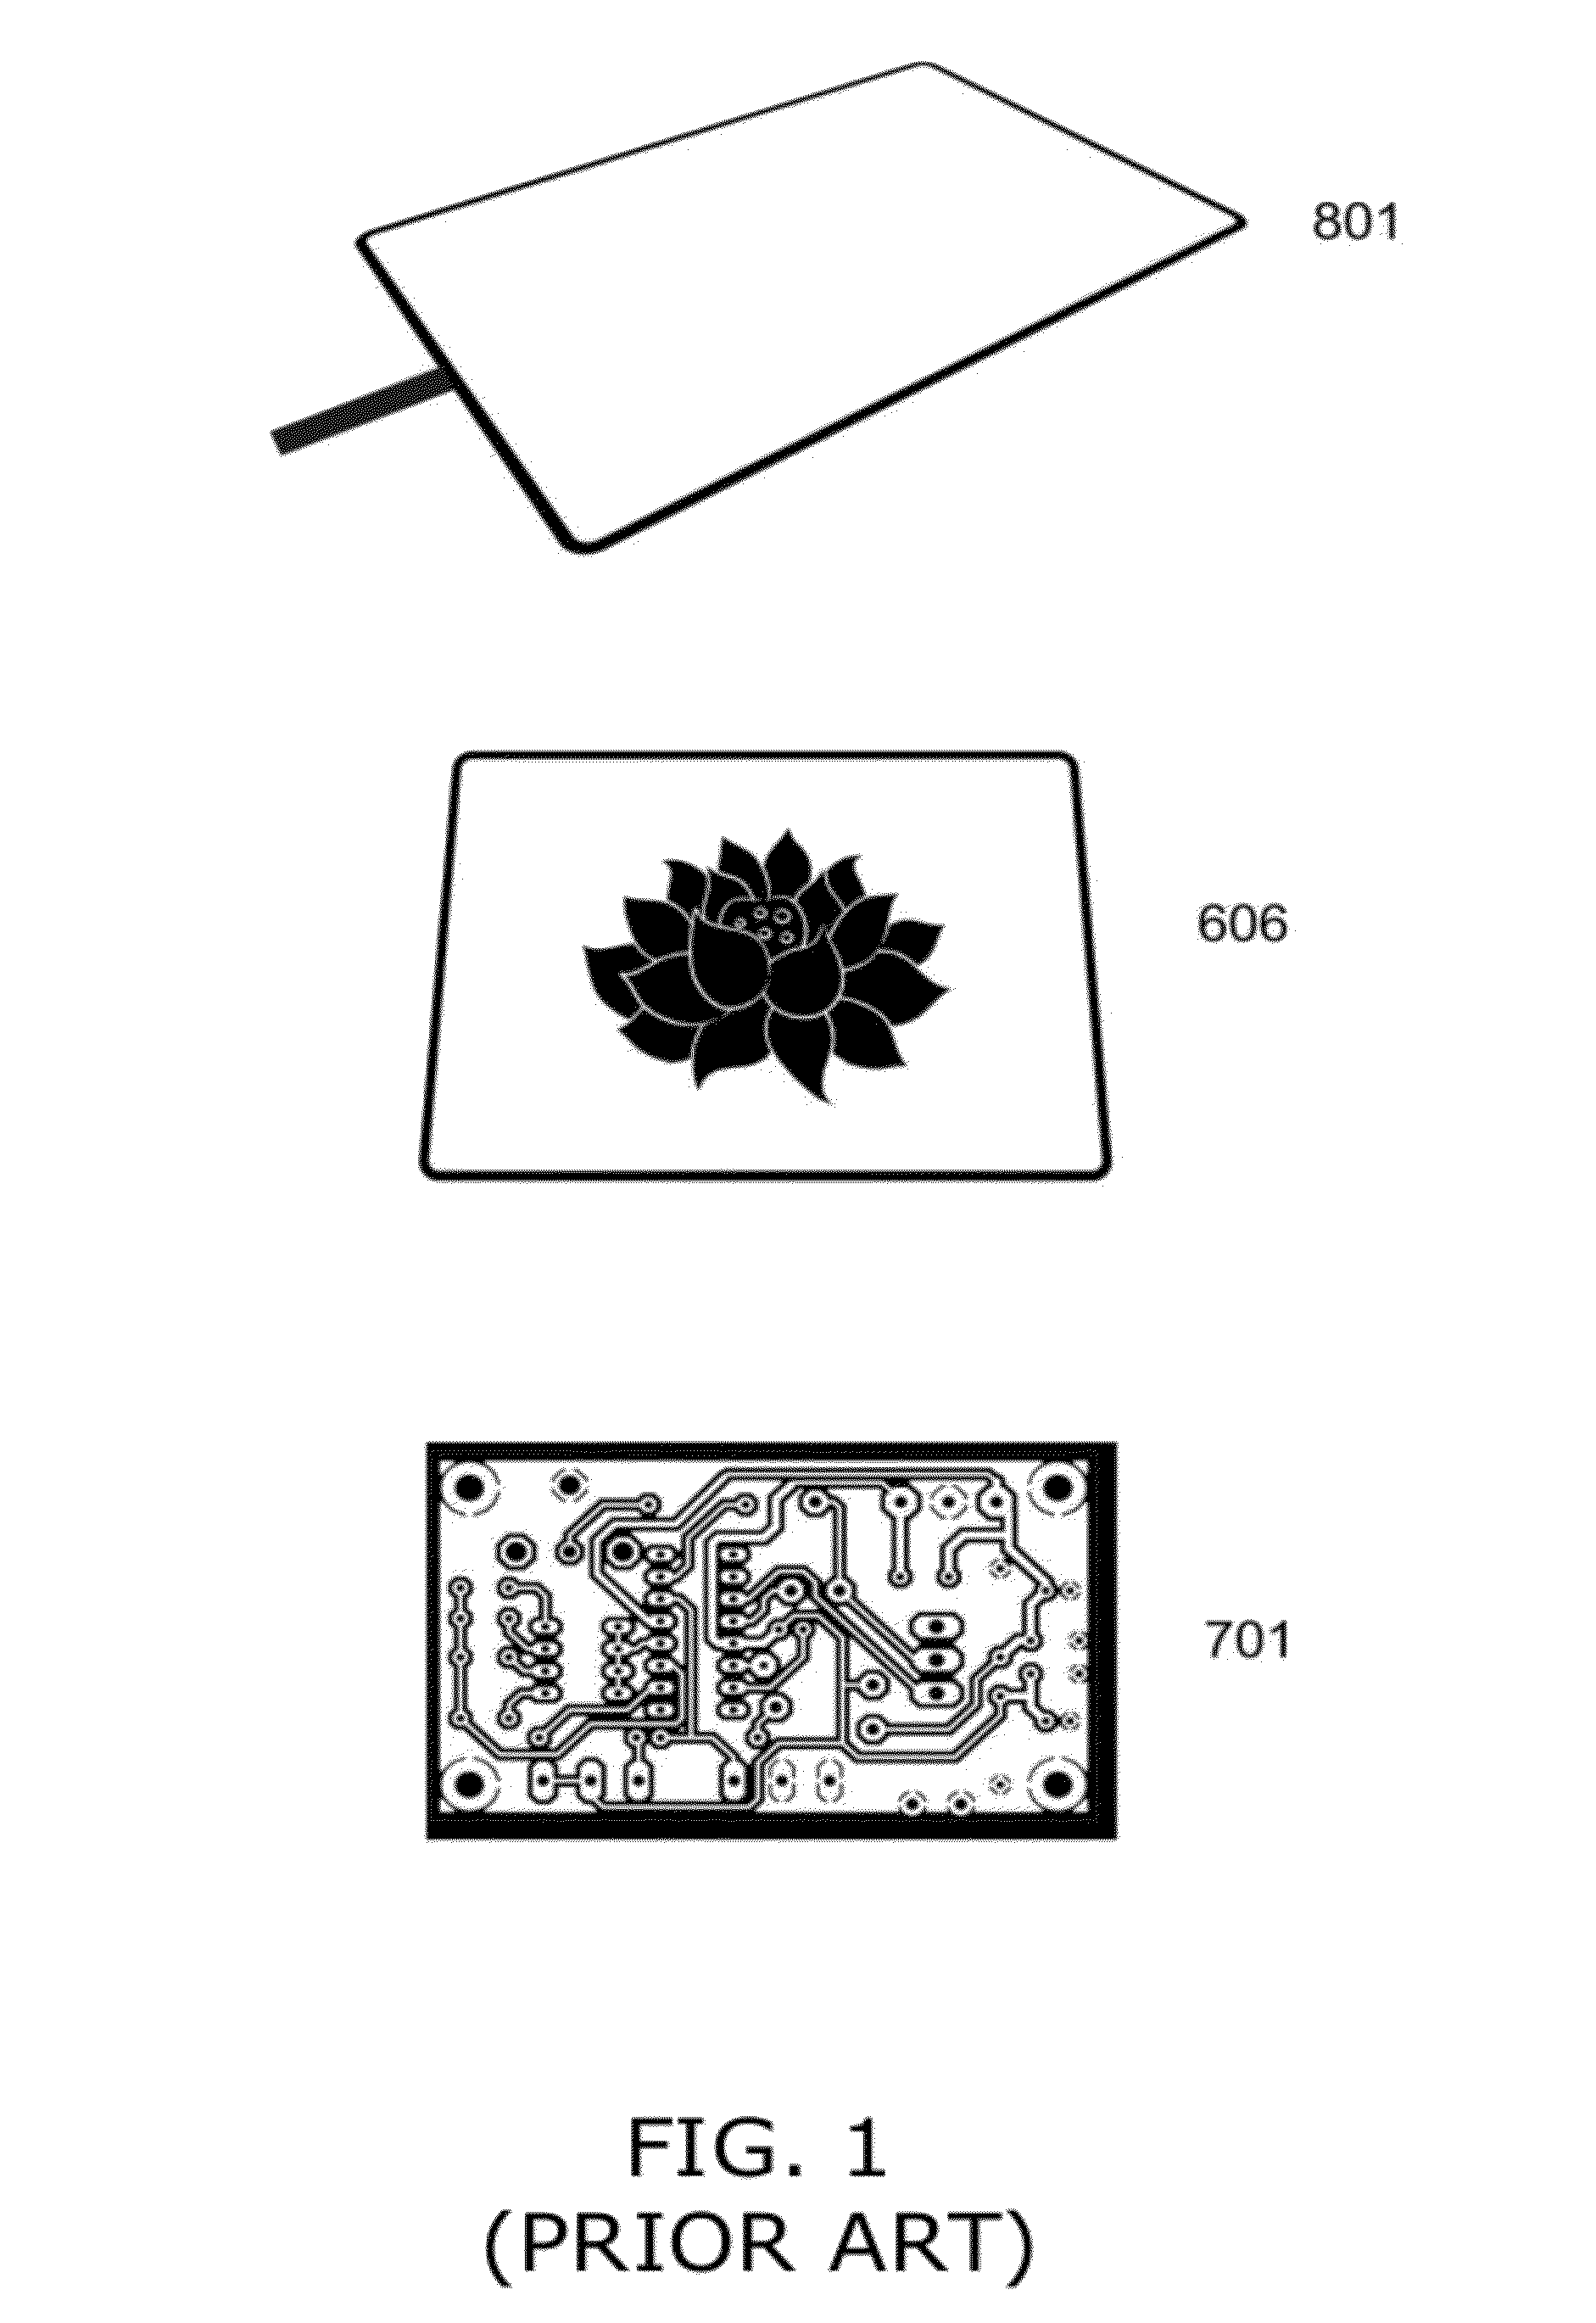 Optical elements with alternating reflective lens facets